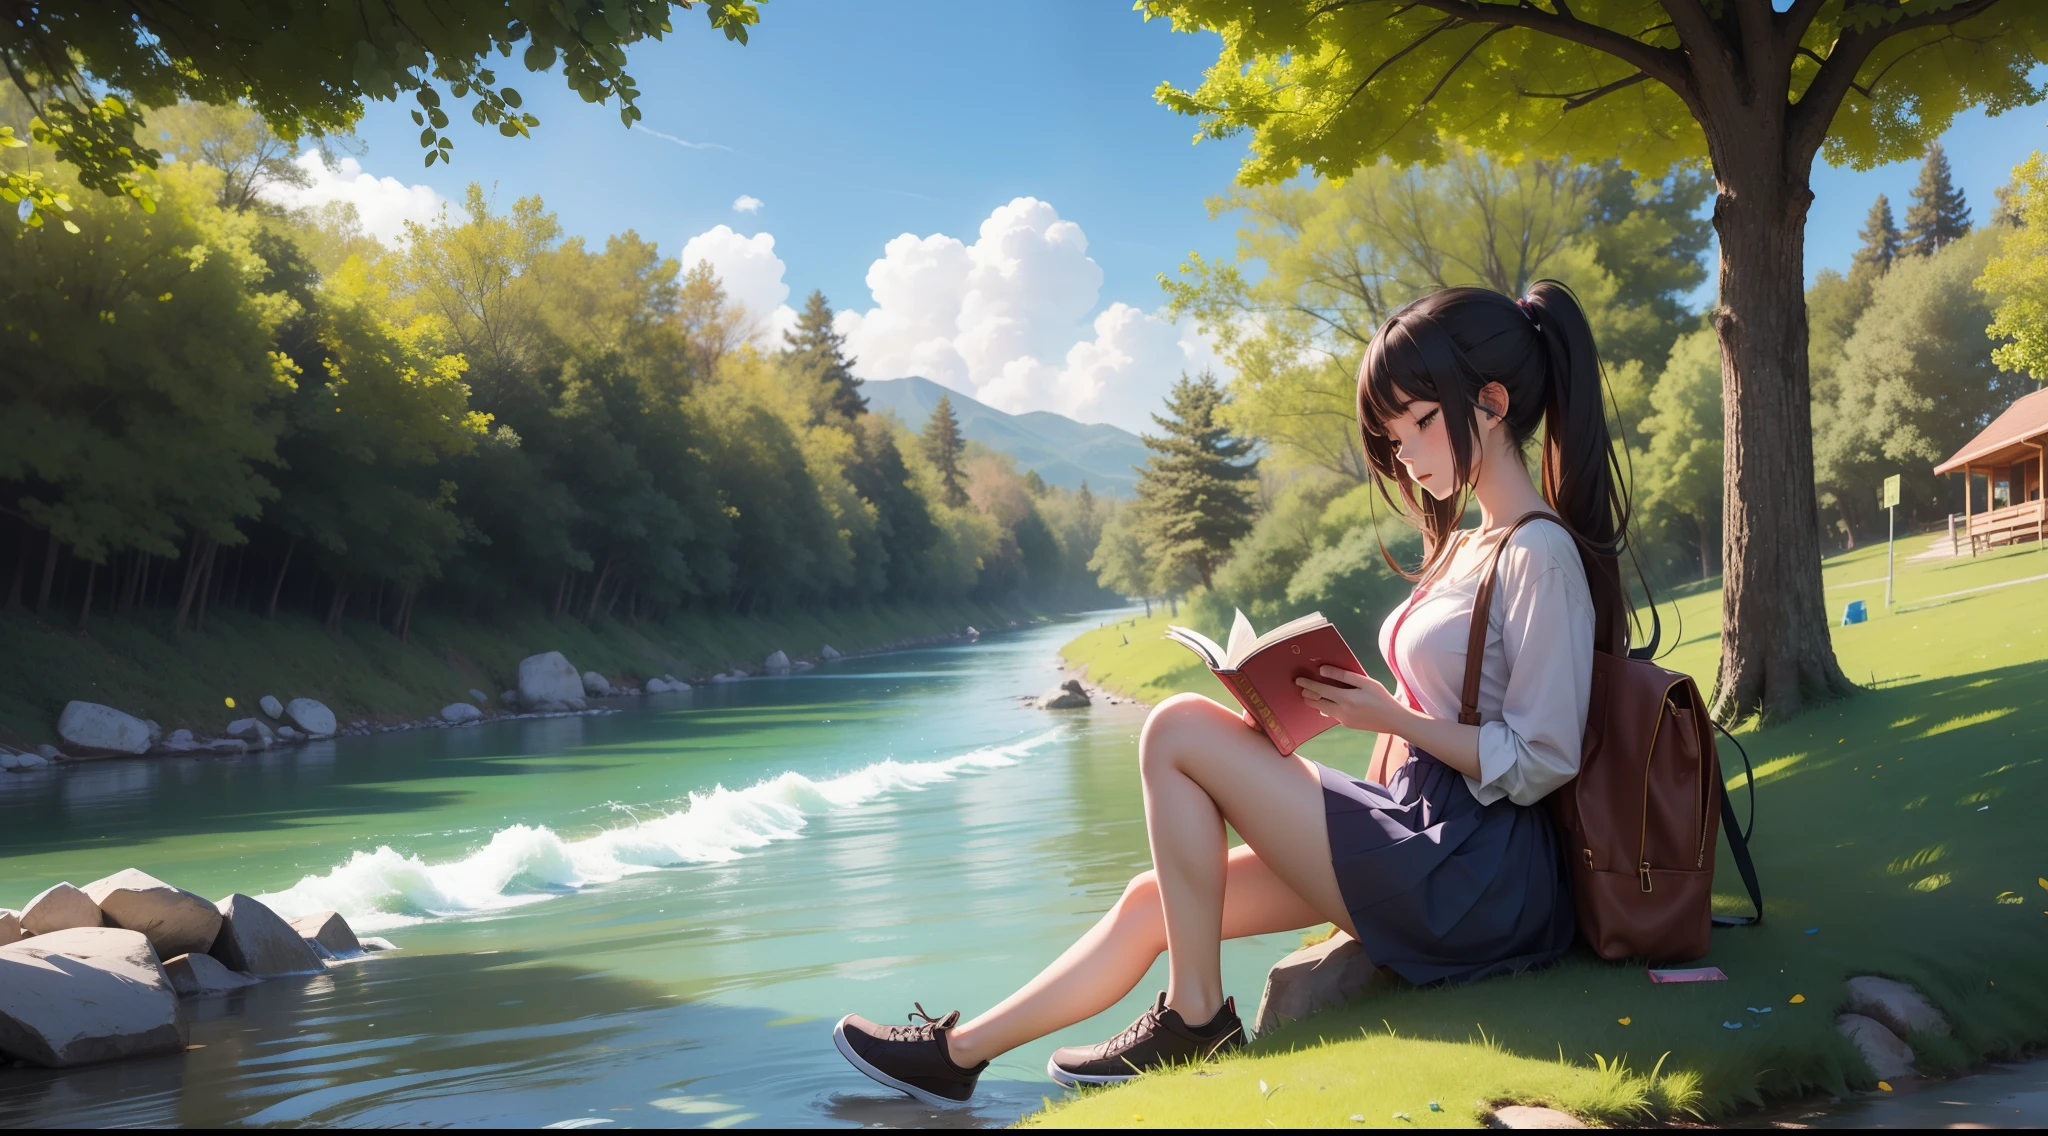 "An anime girl reading while listening to music under a tree near a river."